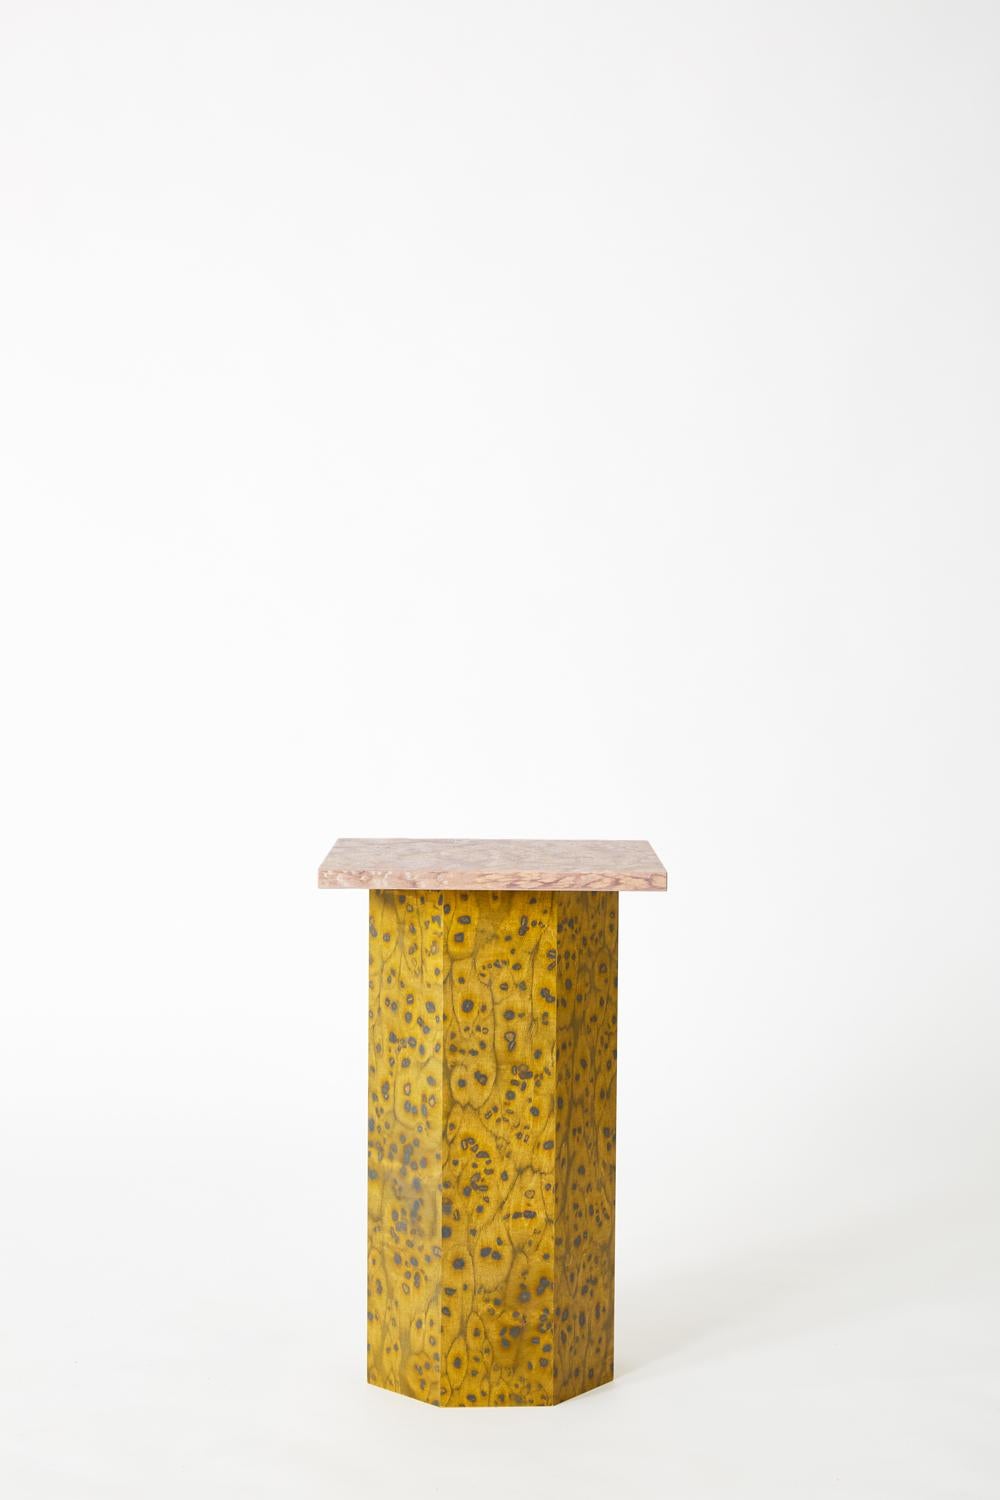 Rectangle Slim Osis Septagon base side table by Llot Llov
Dimensions: 40 x 40 x H 52 cm
Materials: core board birch


With OSIS Edition 5 LLOT LLOV is deepening the understanding of the impact of salt and pigment. Colour and surface patterns